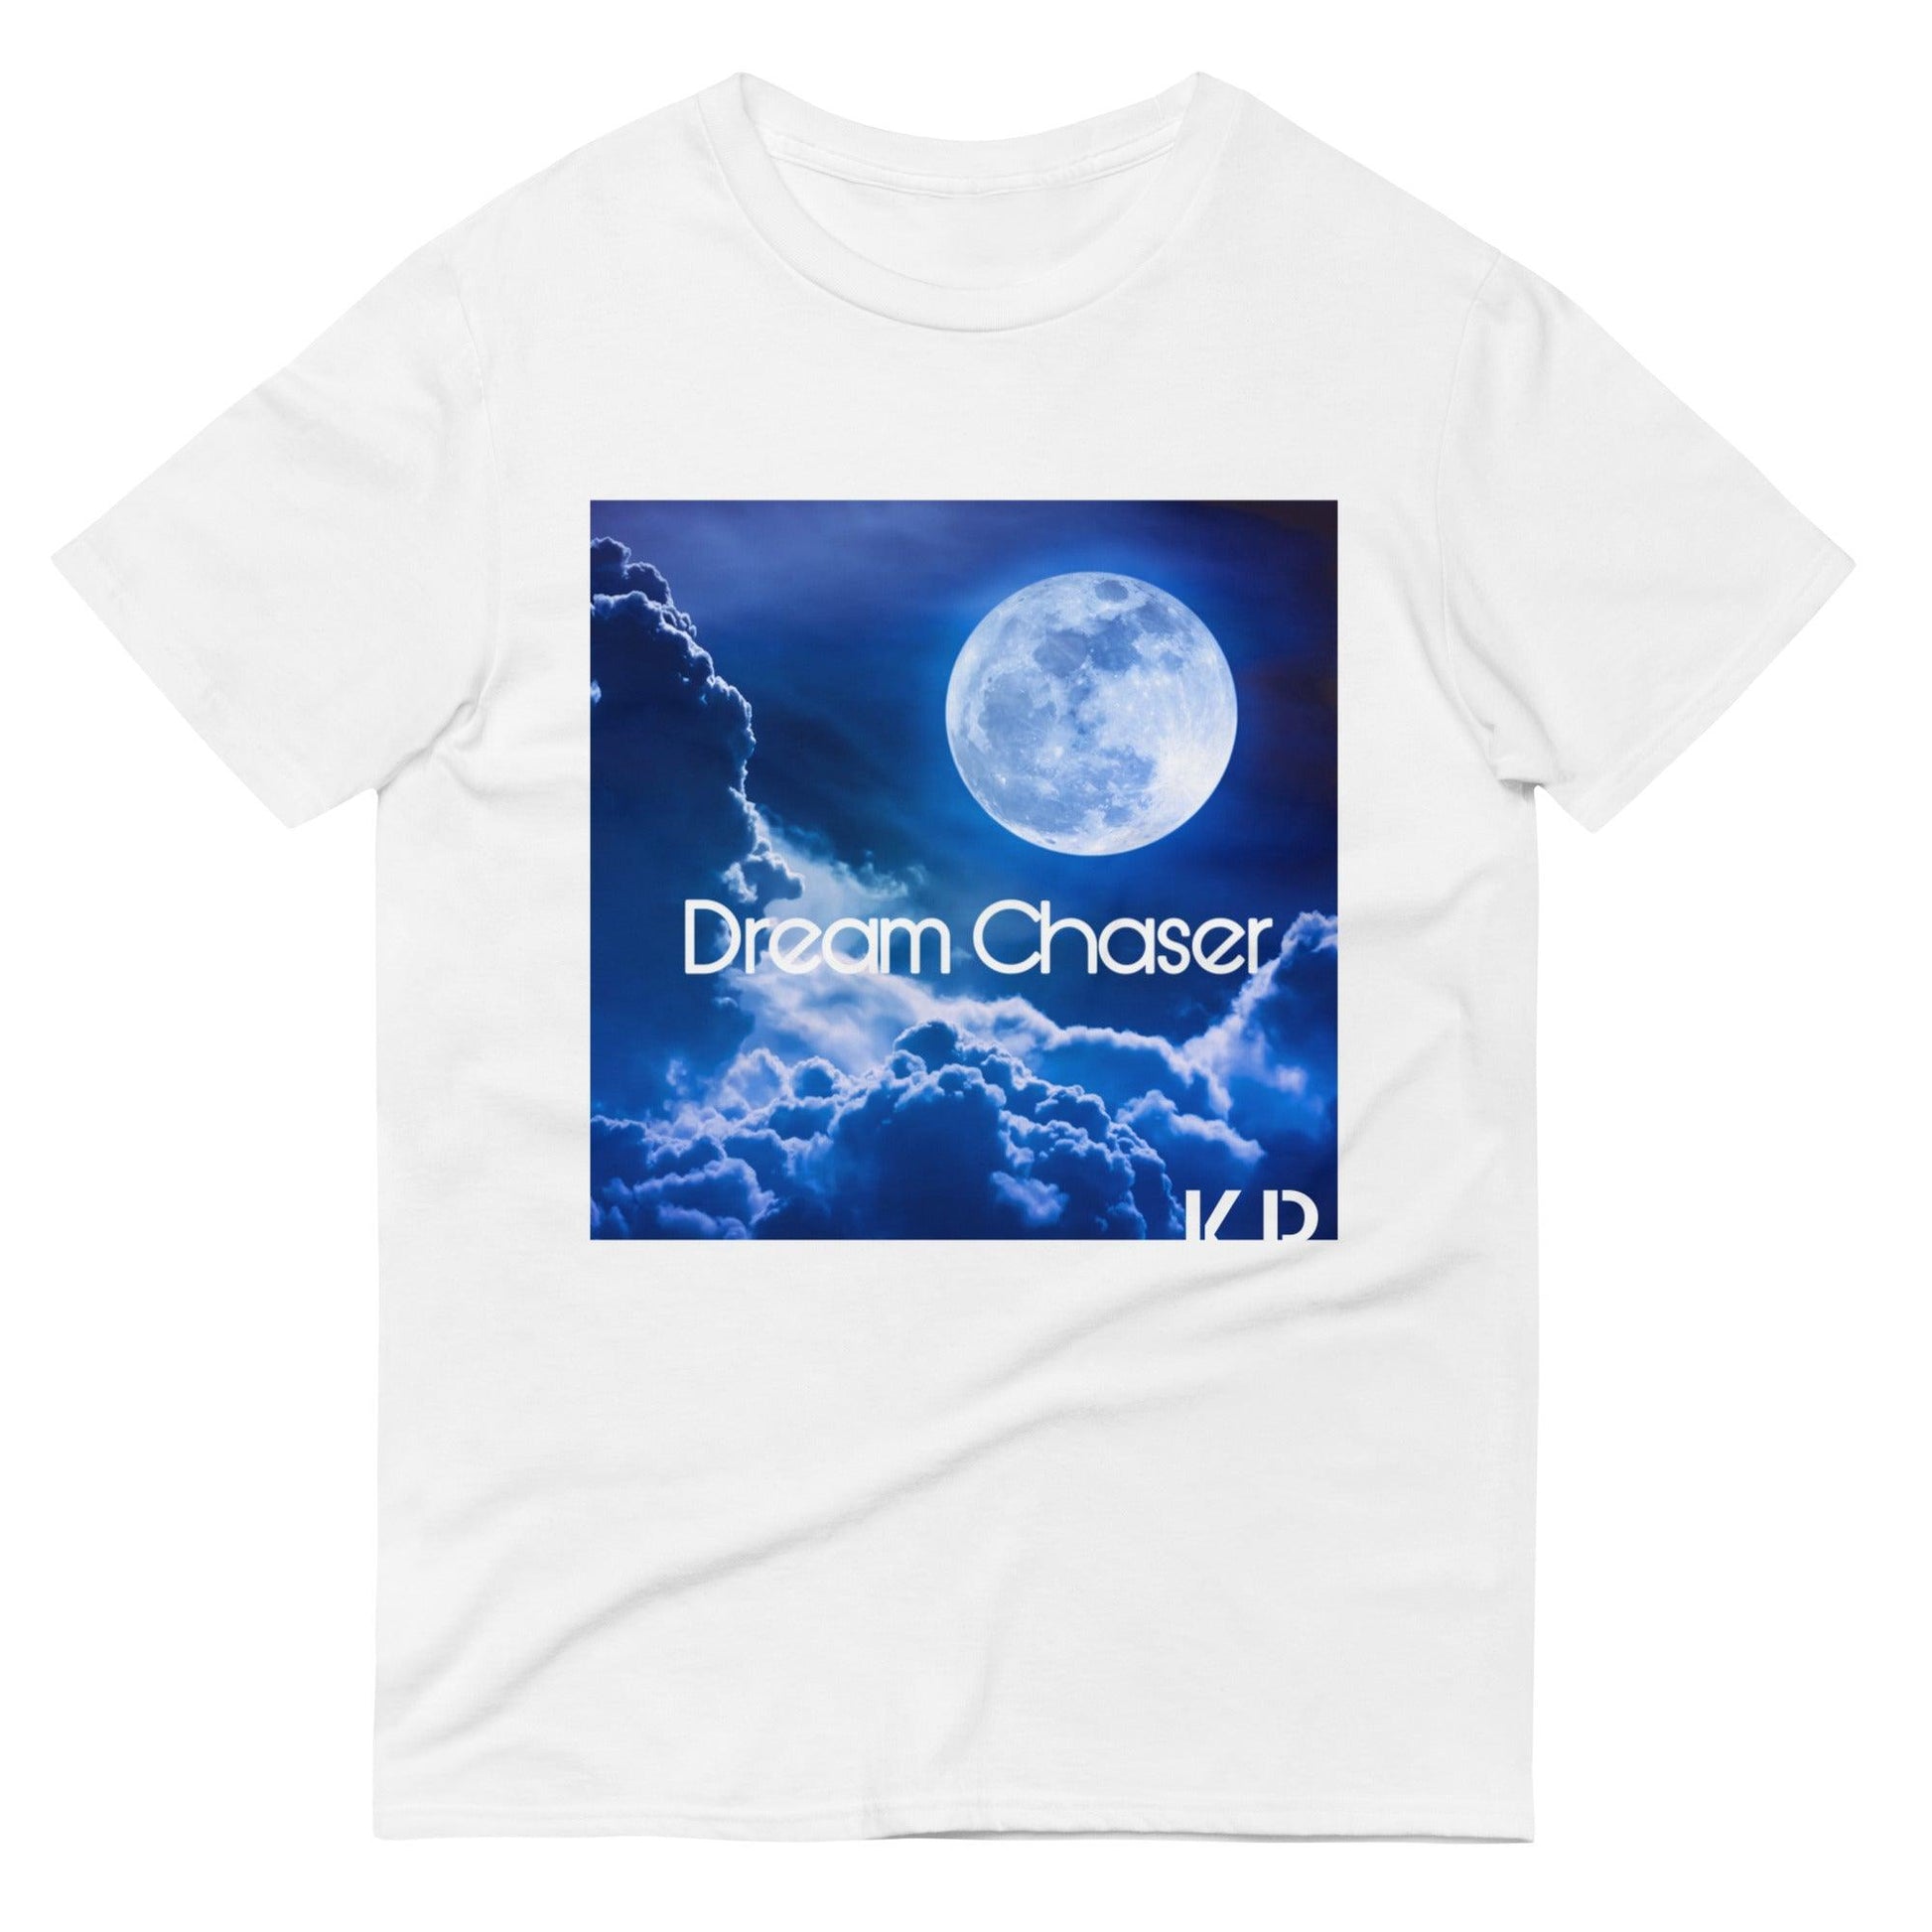 Graphic Short-Sleeve T-Shirt “Dream Chaser” - Kreative Passions